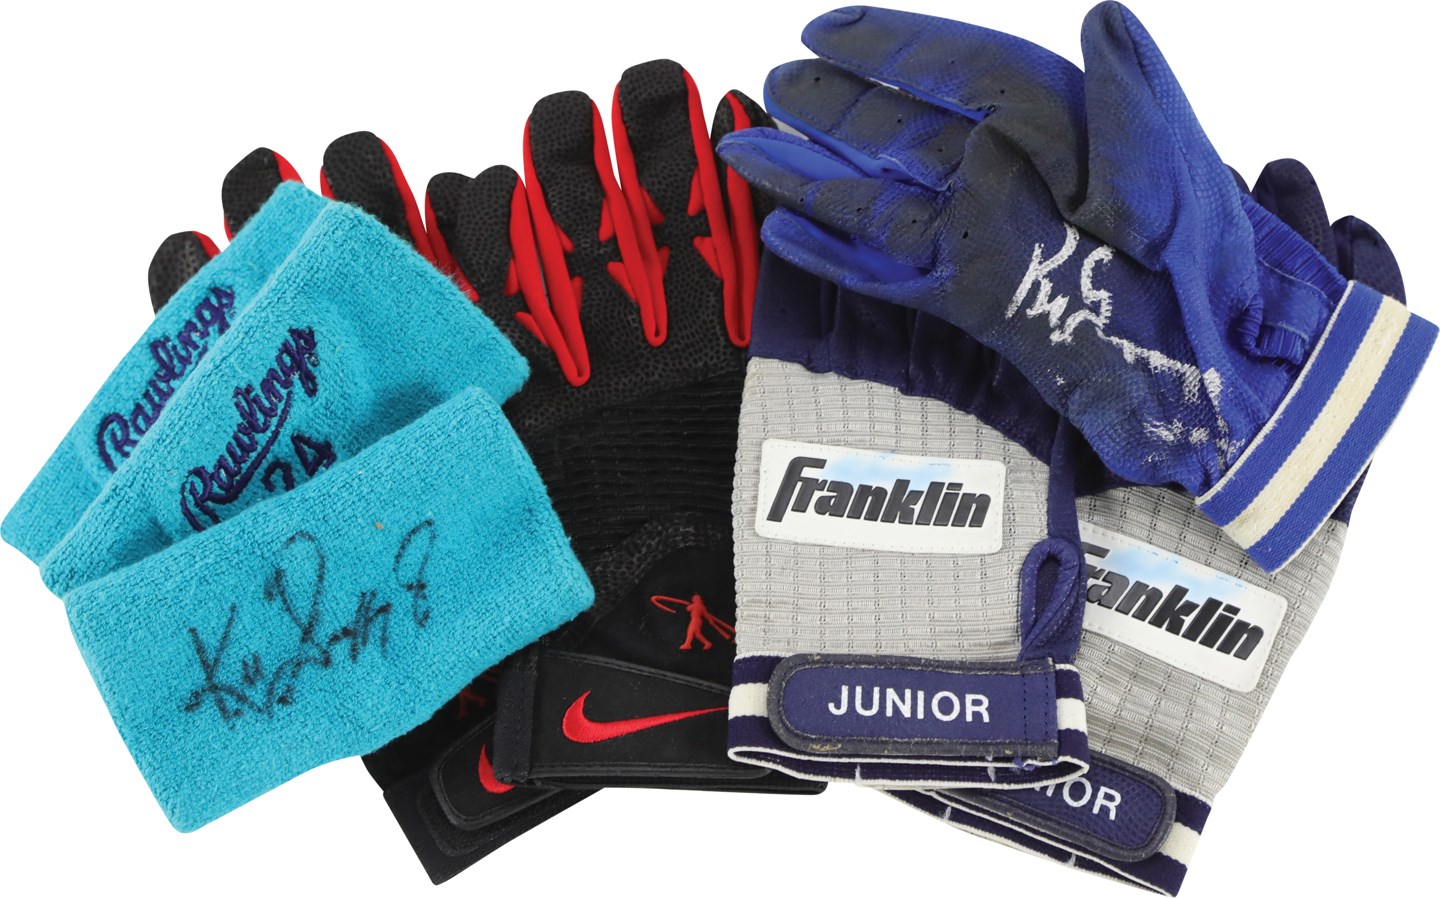 Baseball Equipment - Ken Griffey Jr. Mariners & Reds Game Used Batting Gloves & Wristbands Collection (Griffey Jr. COA & PSA)